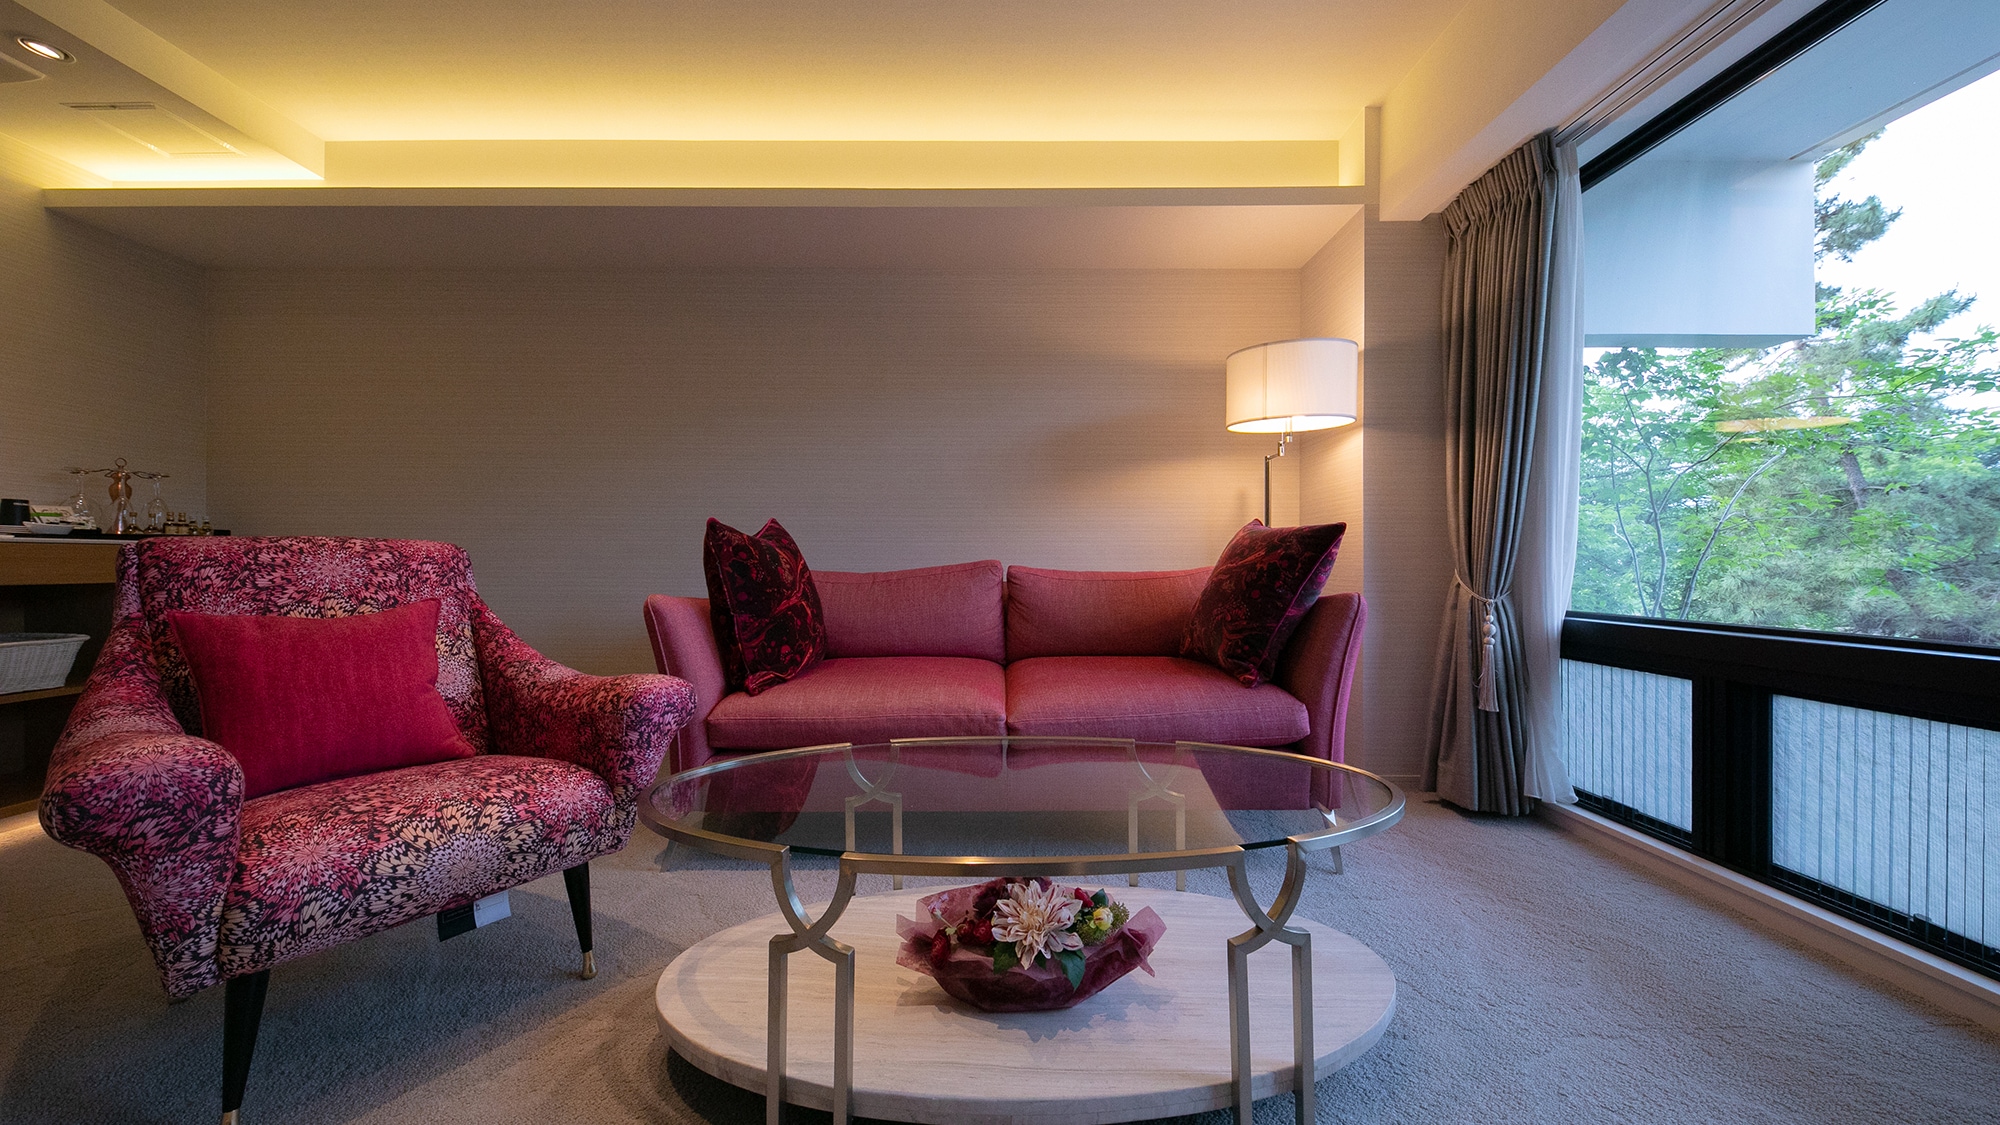 "Moderate Twin A" A bright pink and wine red sofa and a champagne gold center table.